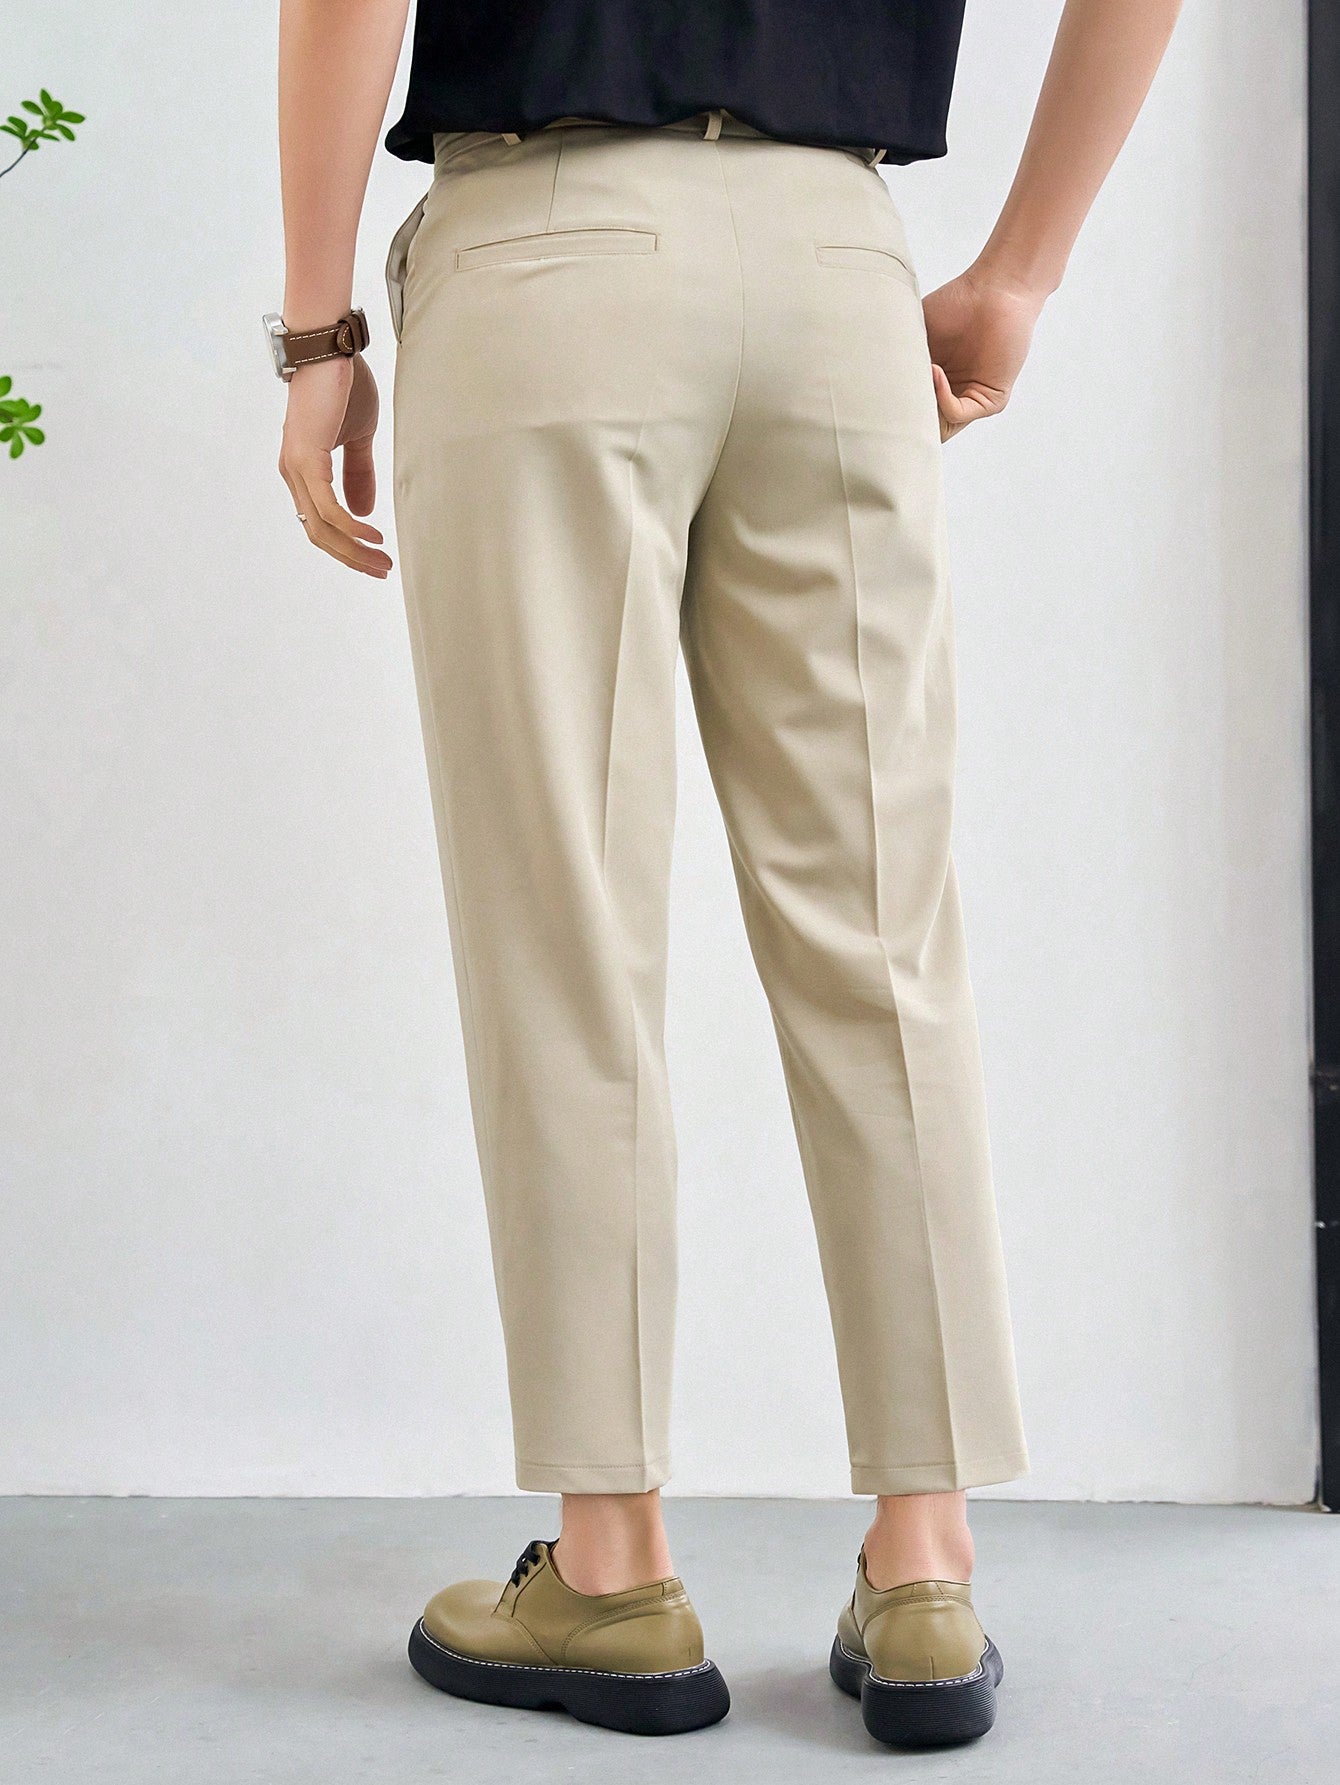 Men's Solid Color Pants With Side Pockets